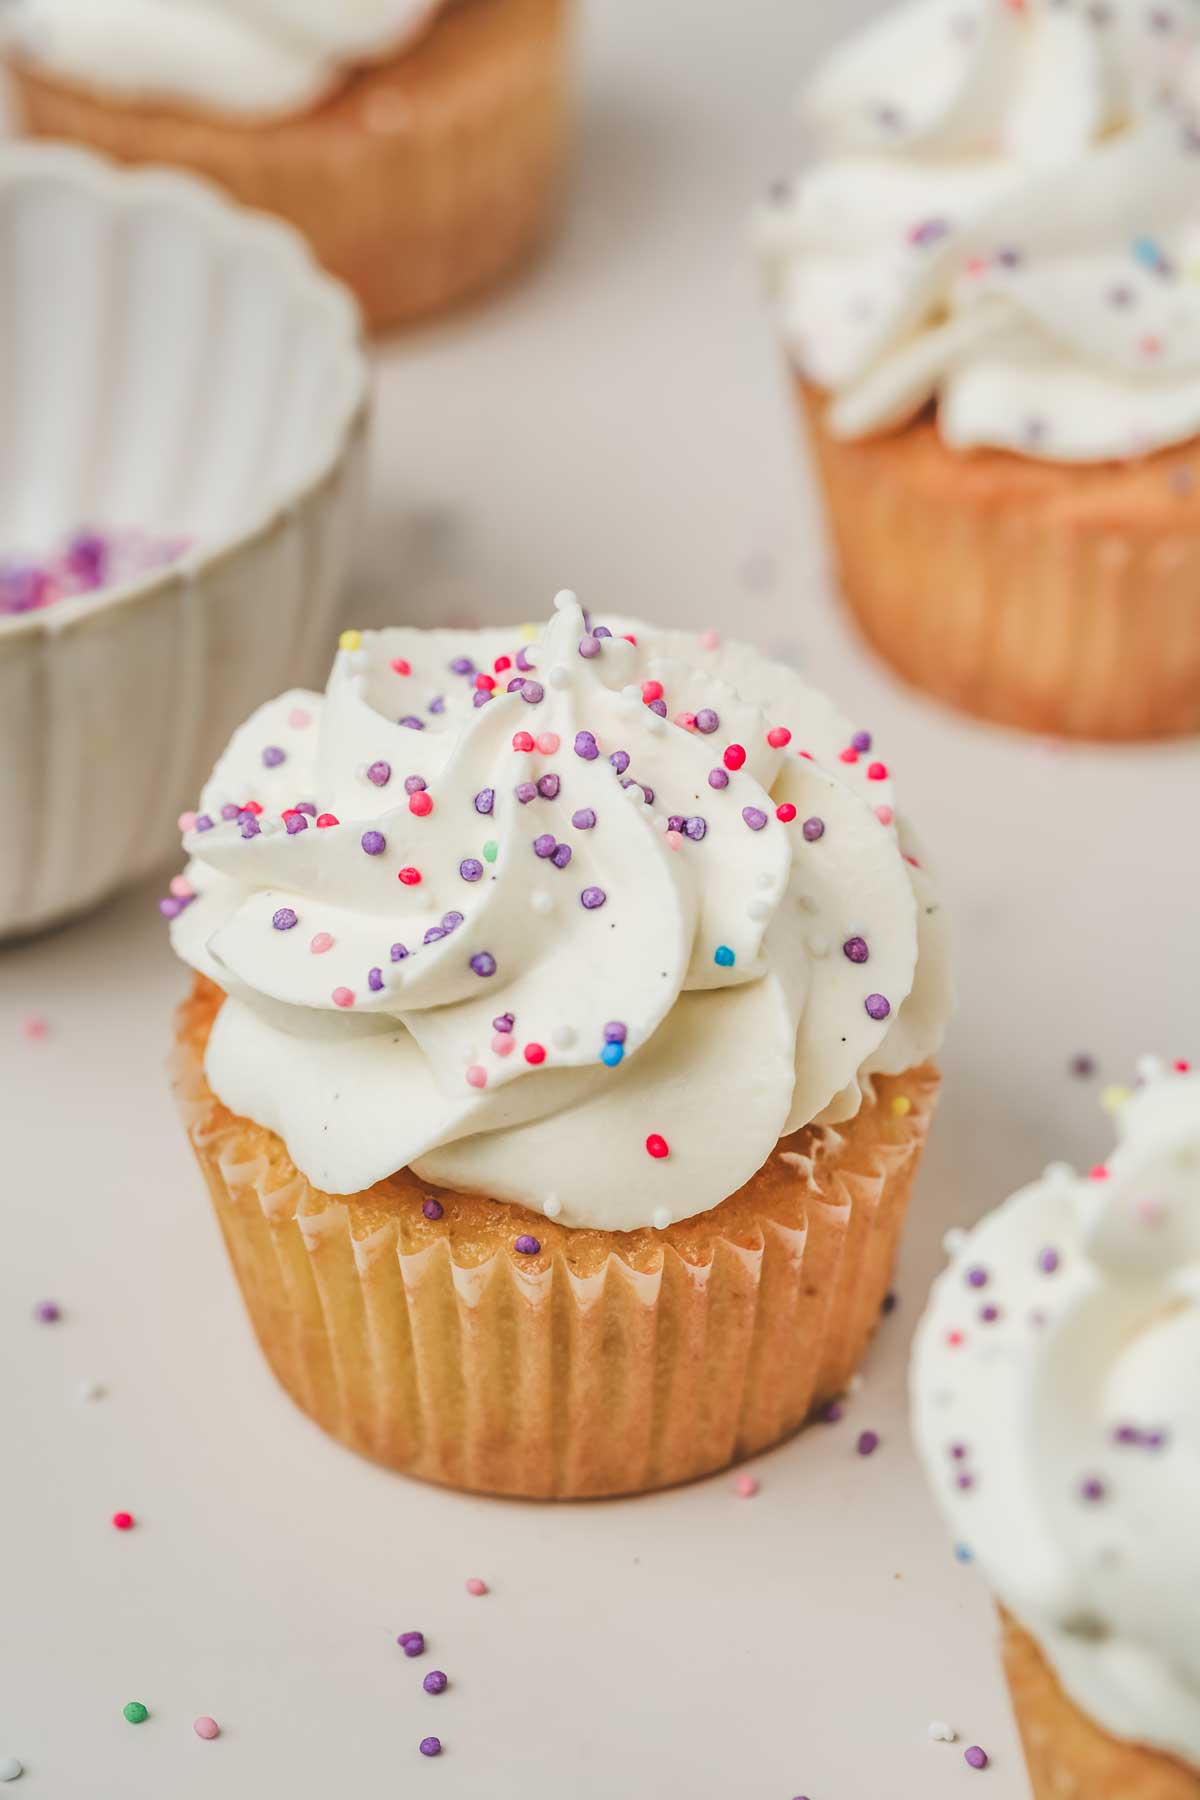 How To Convert a Cake Recipe to Cupcakes In 8 Simple Steps | The Kitchn